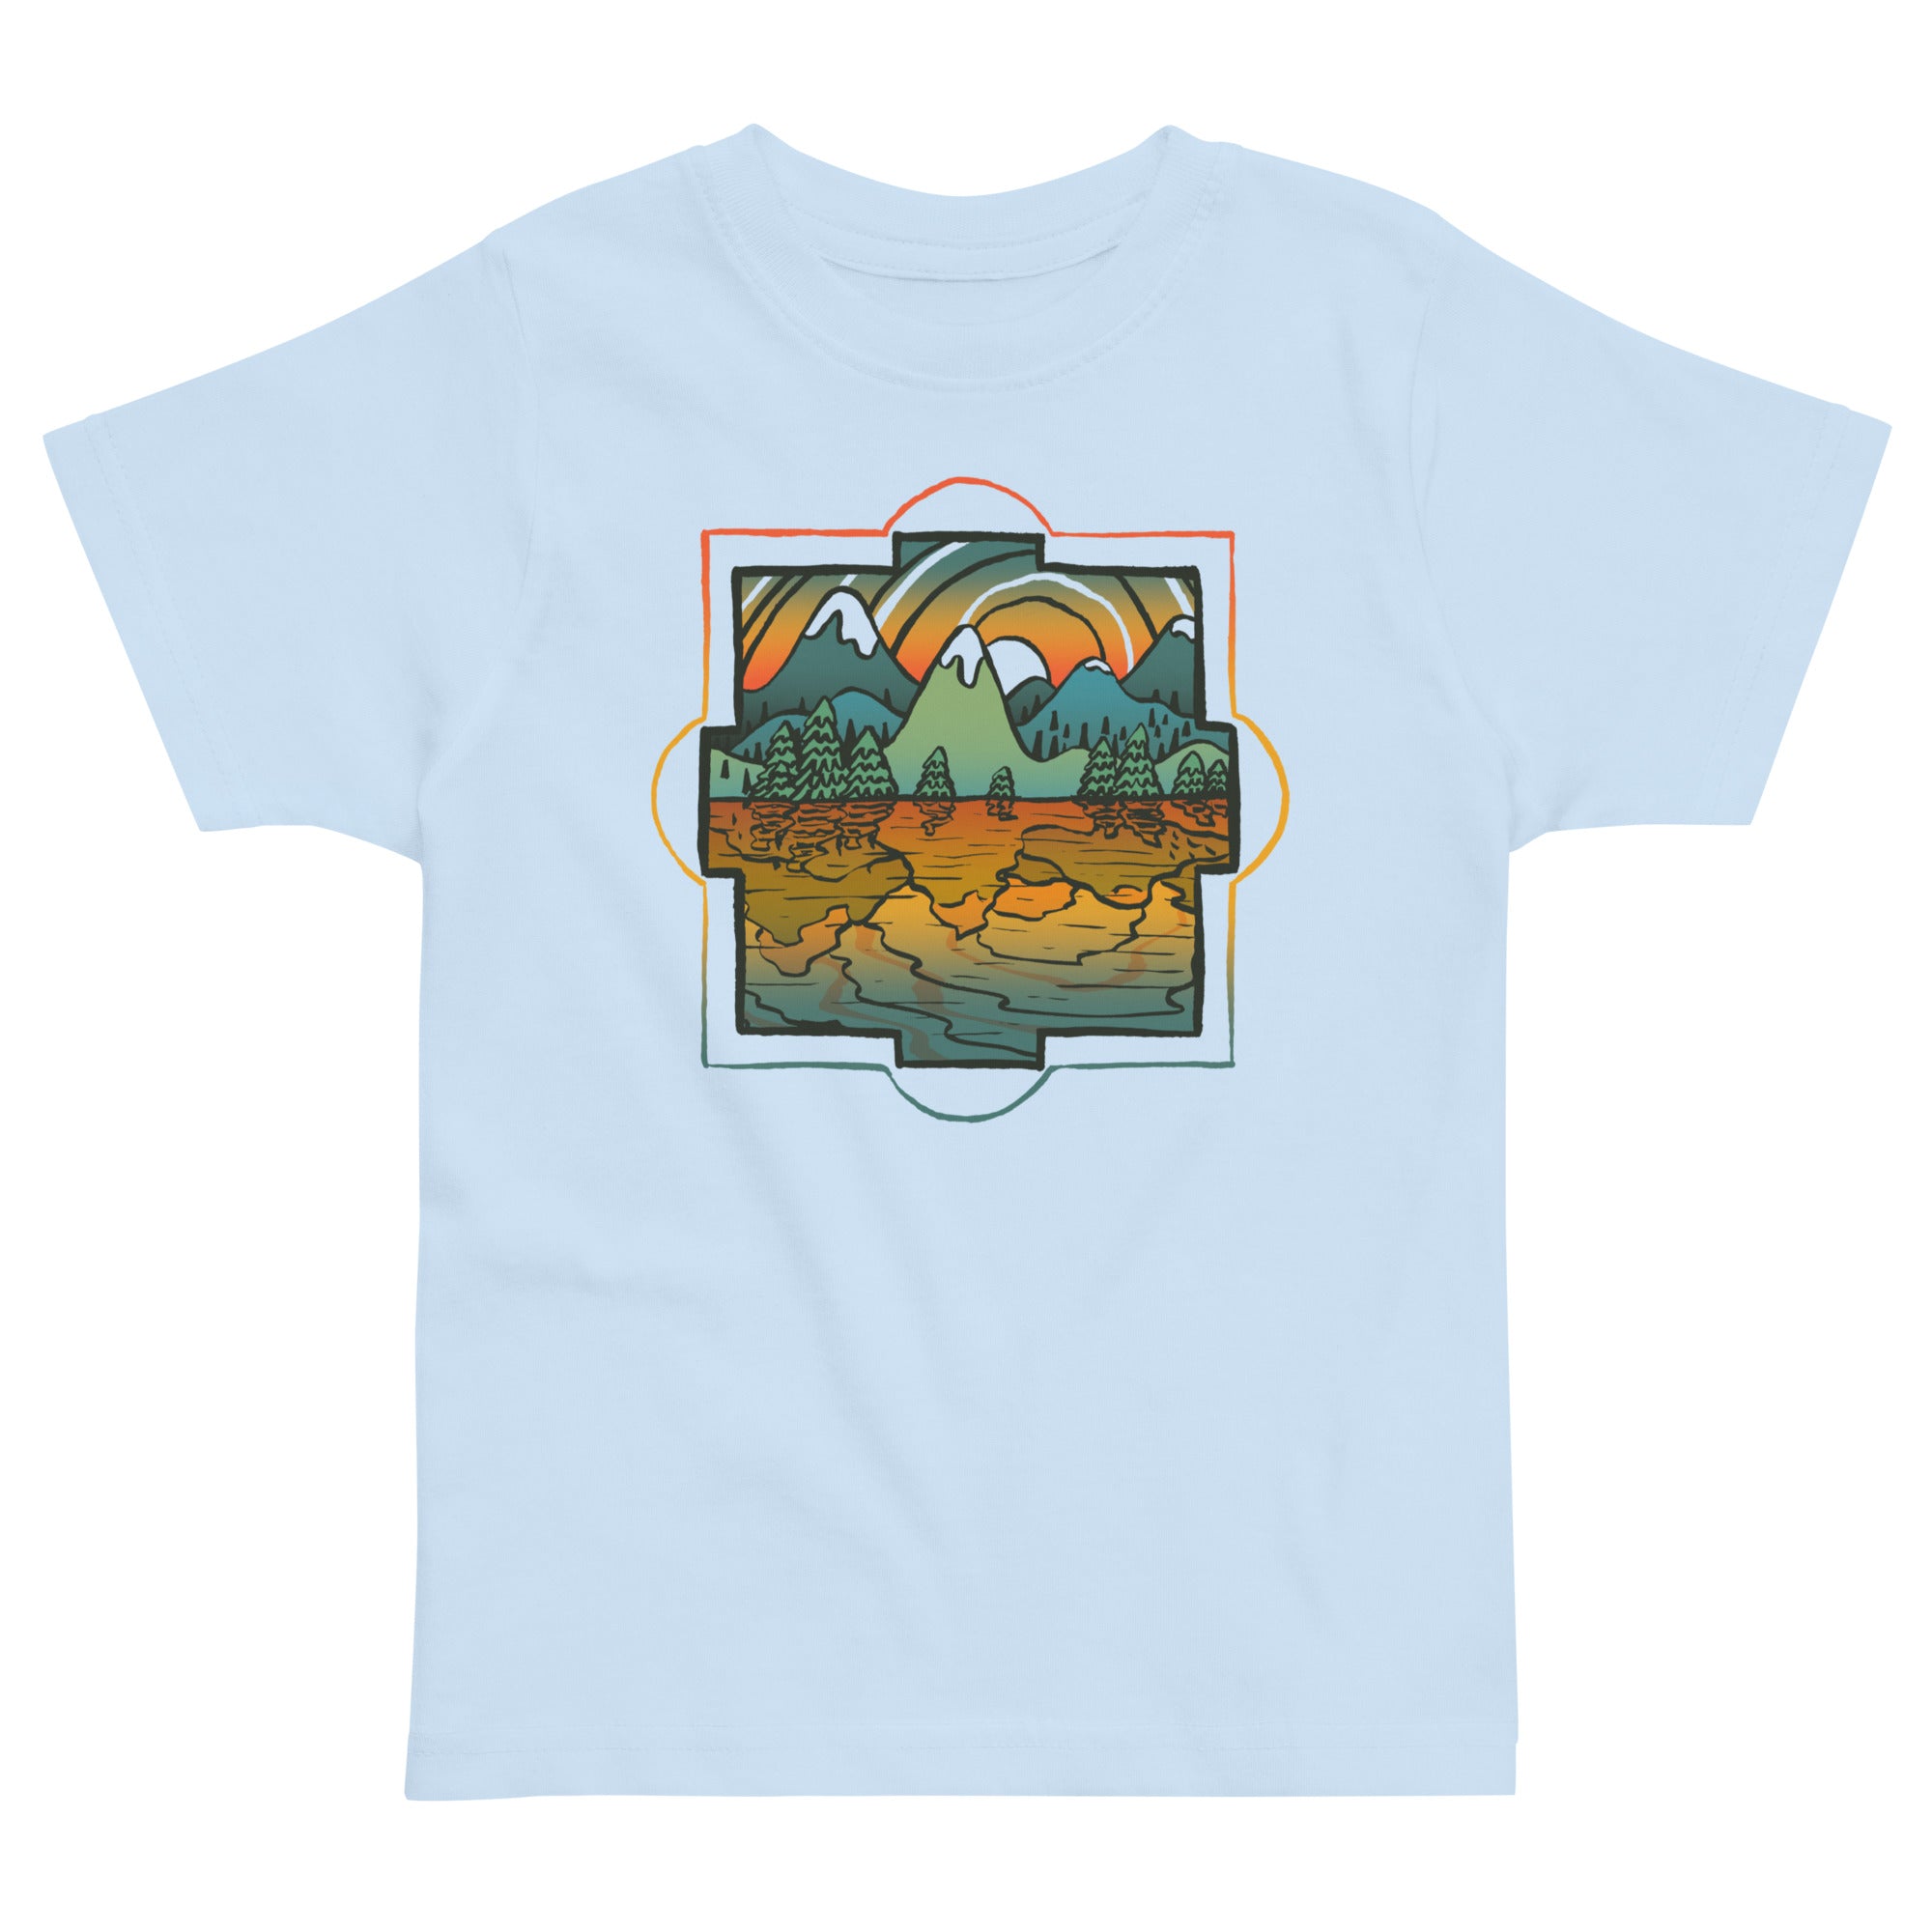 Toddler's Reflections Cool Extra Soft T-Shirt | Retro Artsy Landscape Tee | Solid Threads